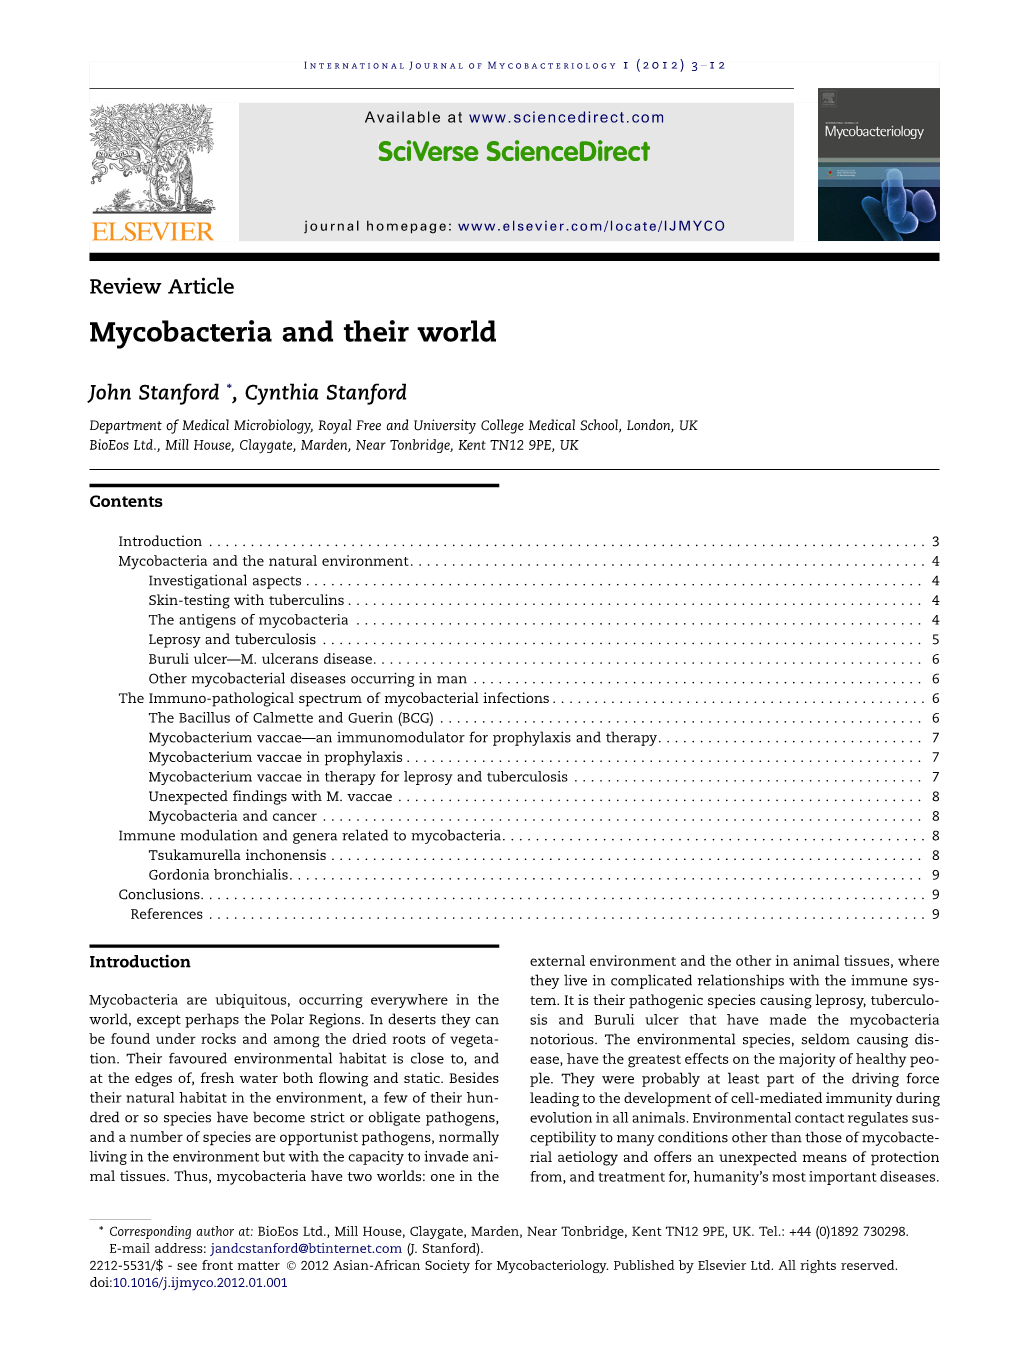 Mycobacteria and Their World